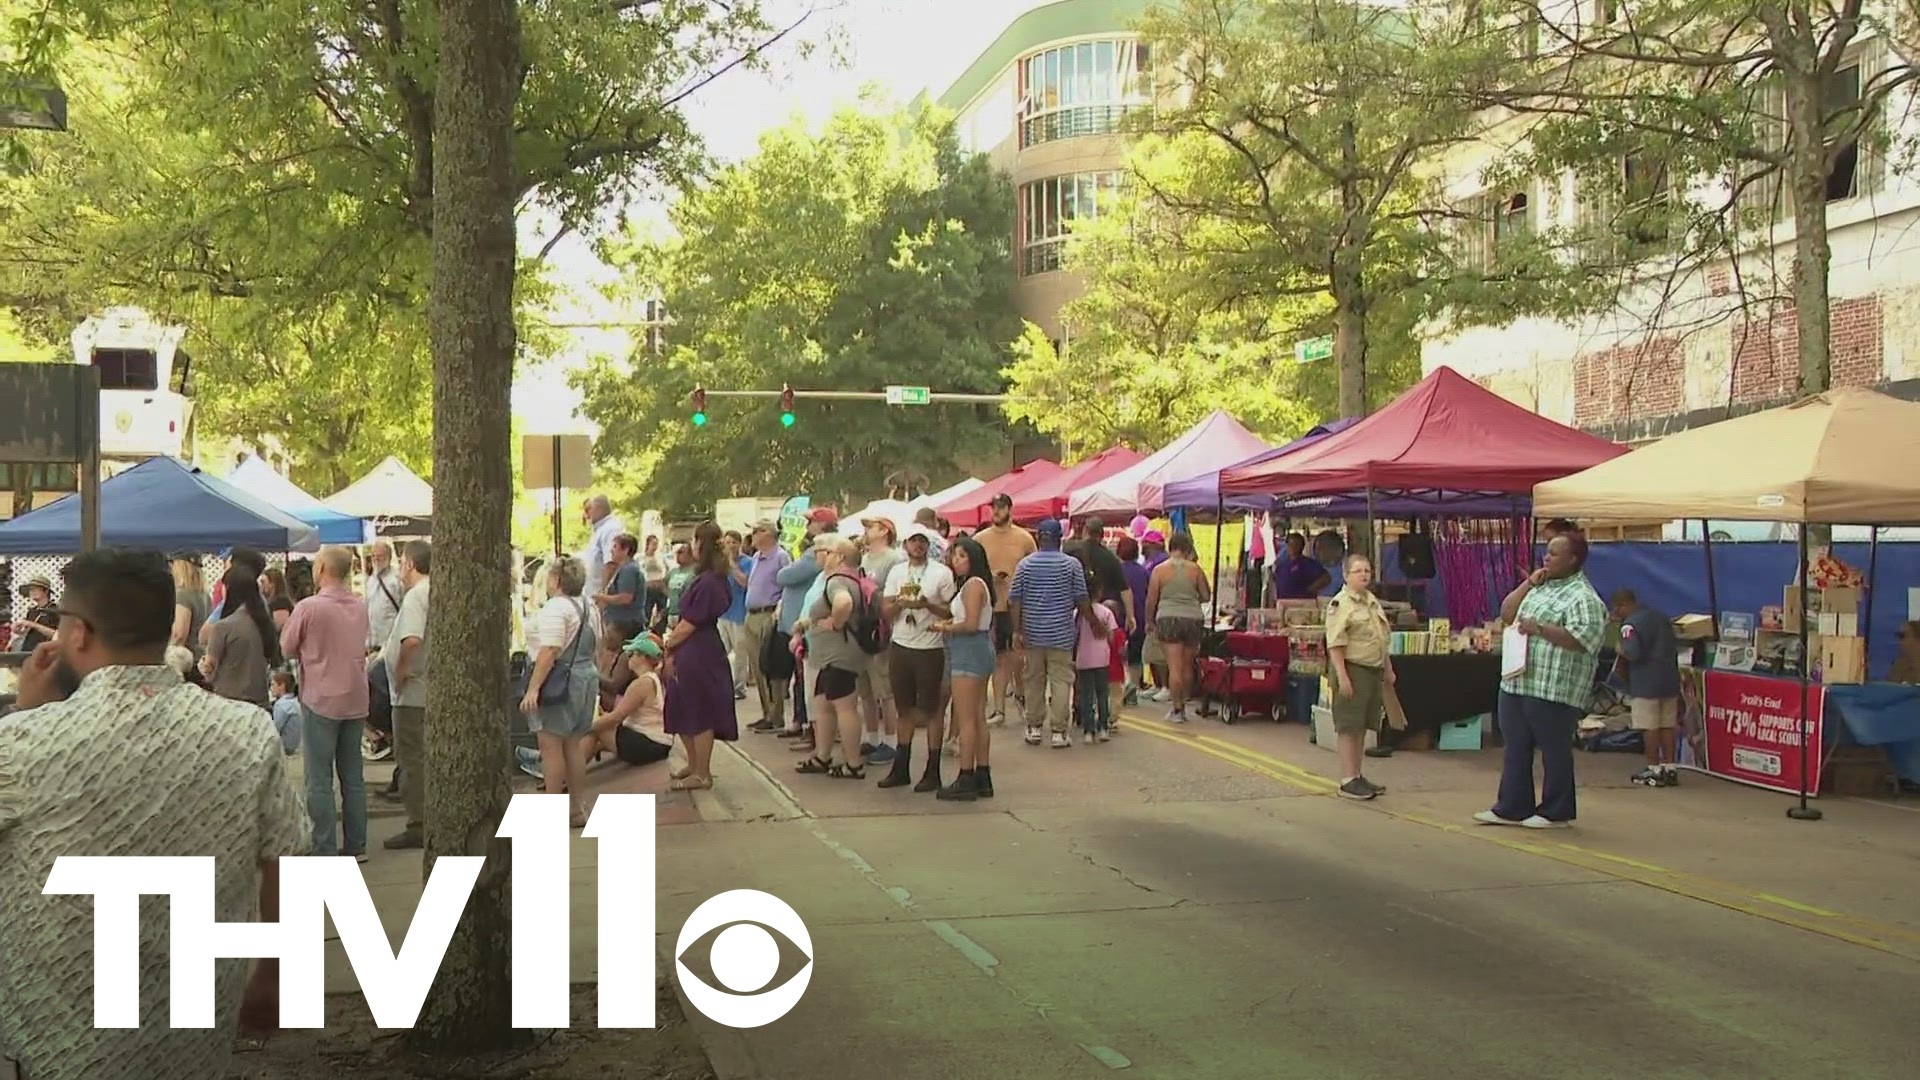 The Main Street Food Truck Festival returned to Little Rock this year with not only tons of great food but also games, live music and even vendors!